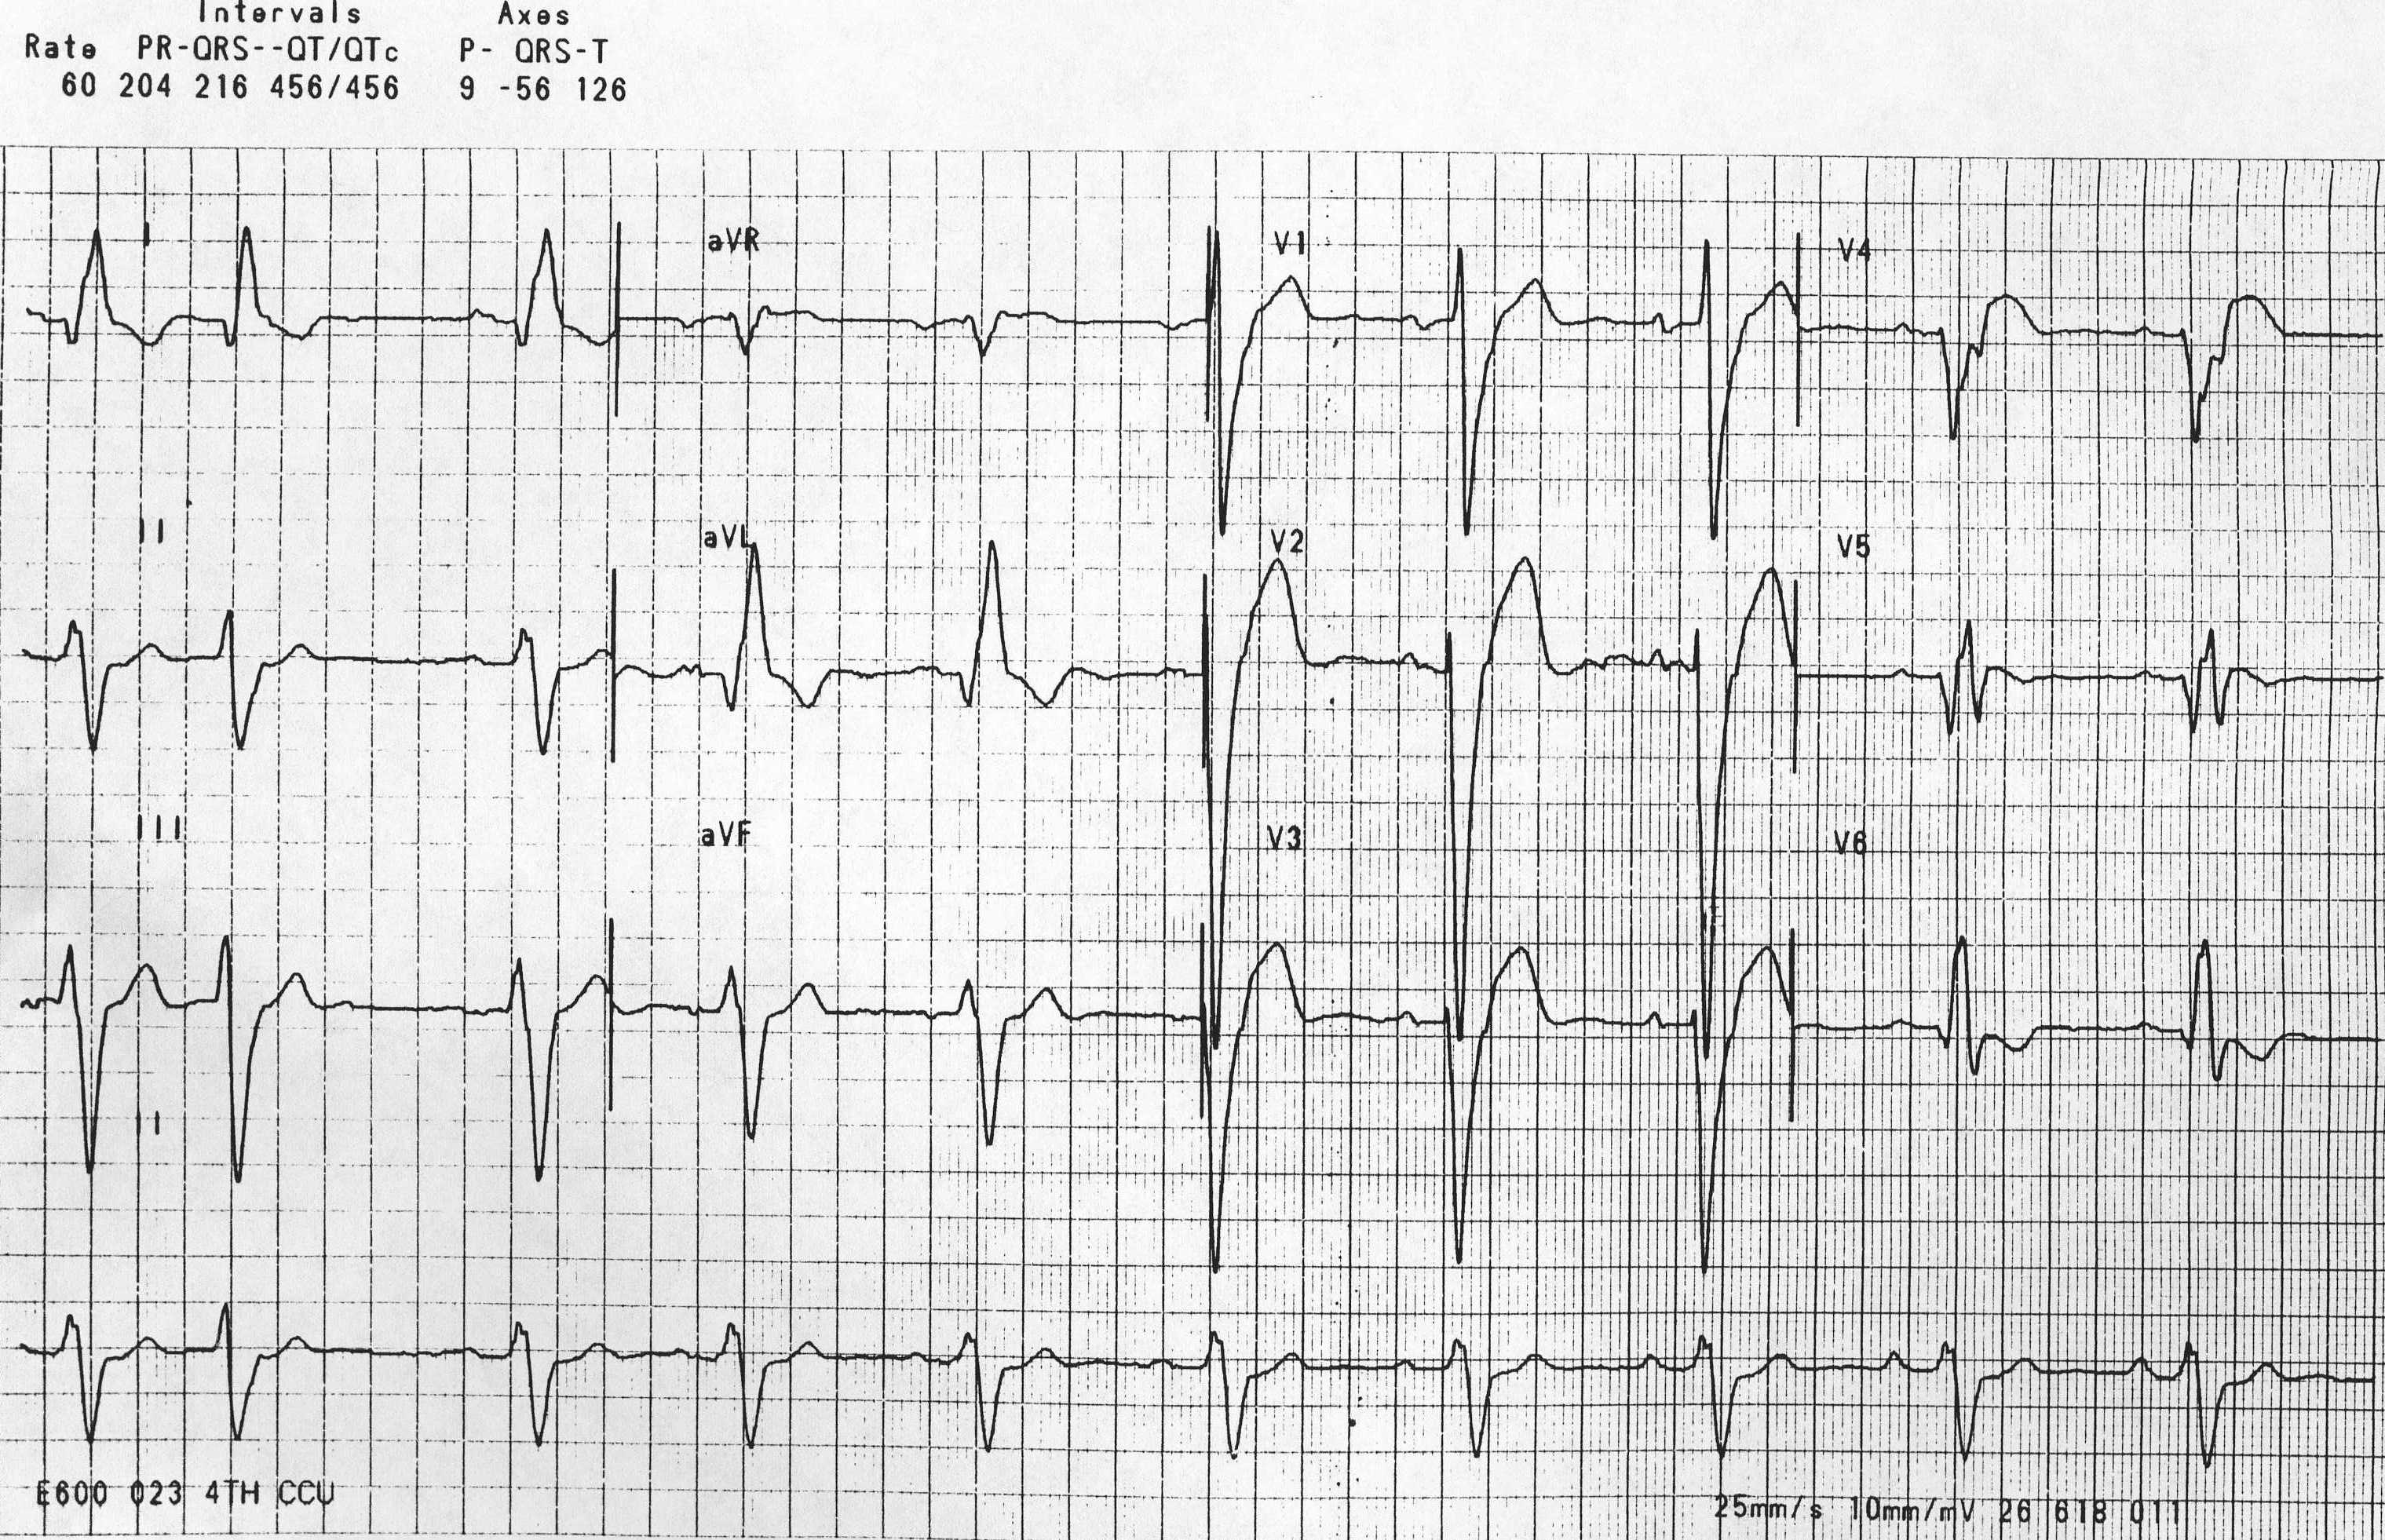 LBBB with Lateral Q waves Image courtesy of C. Michael Gibson MS MD and Copylefted